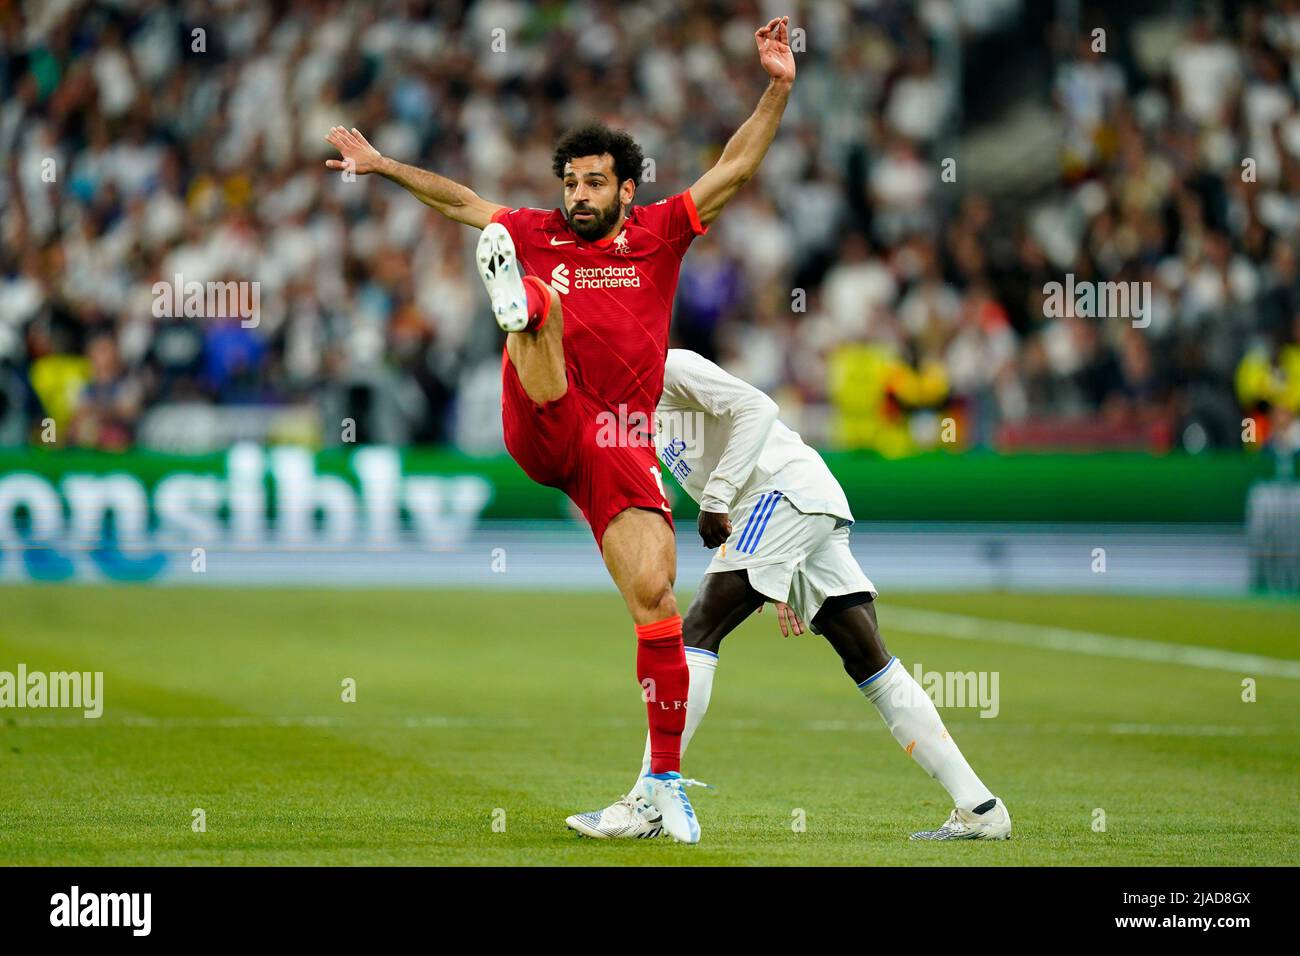 Mohamed Salah of Liverpool FC during the UEFA Champions League Final match between Liverpool FC and Real Madrid played at Stade de France on May 28, 2022 in Paris, France. (Photo / Magma) Stock Photo